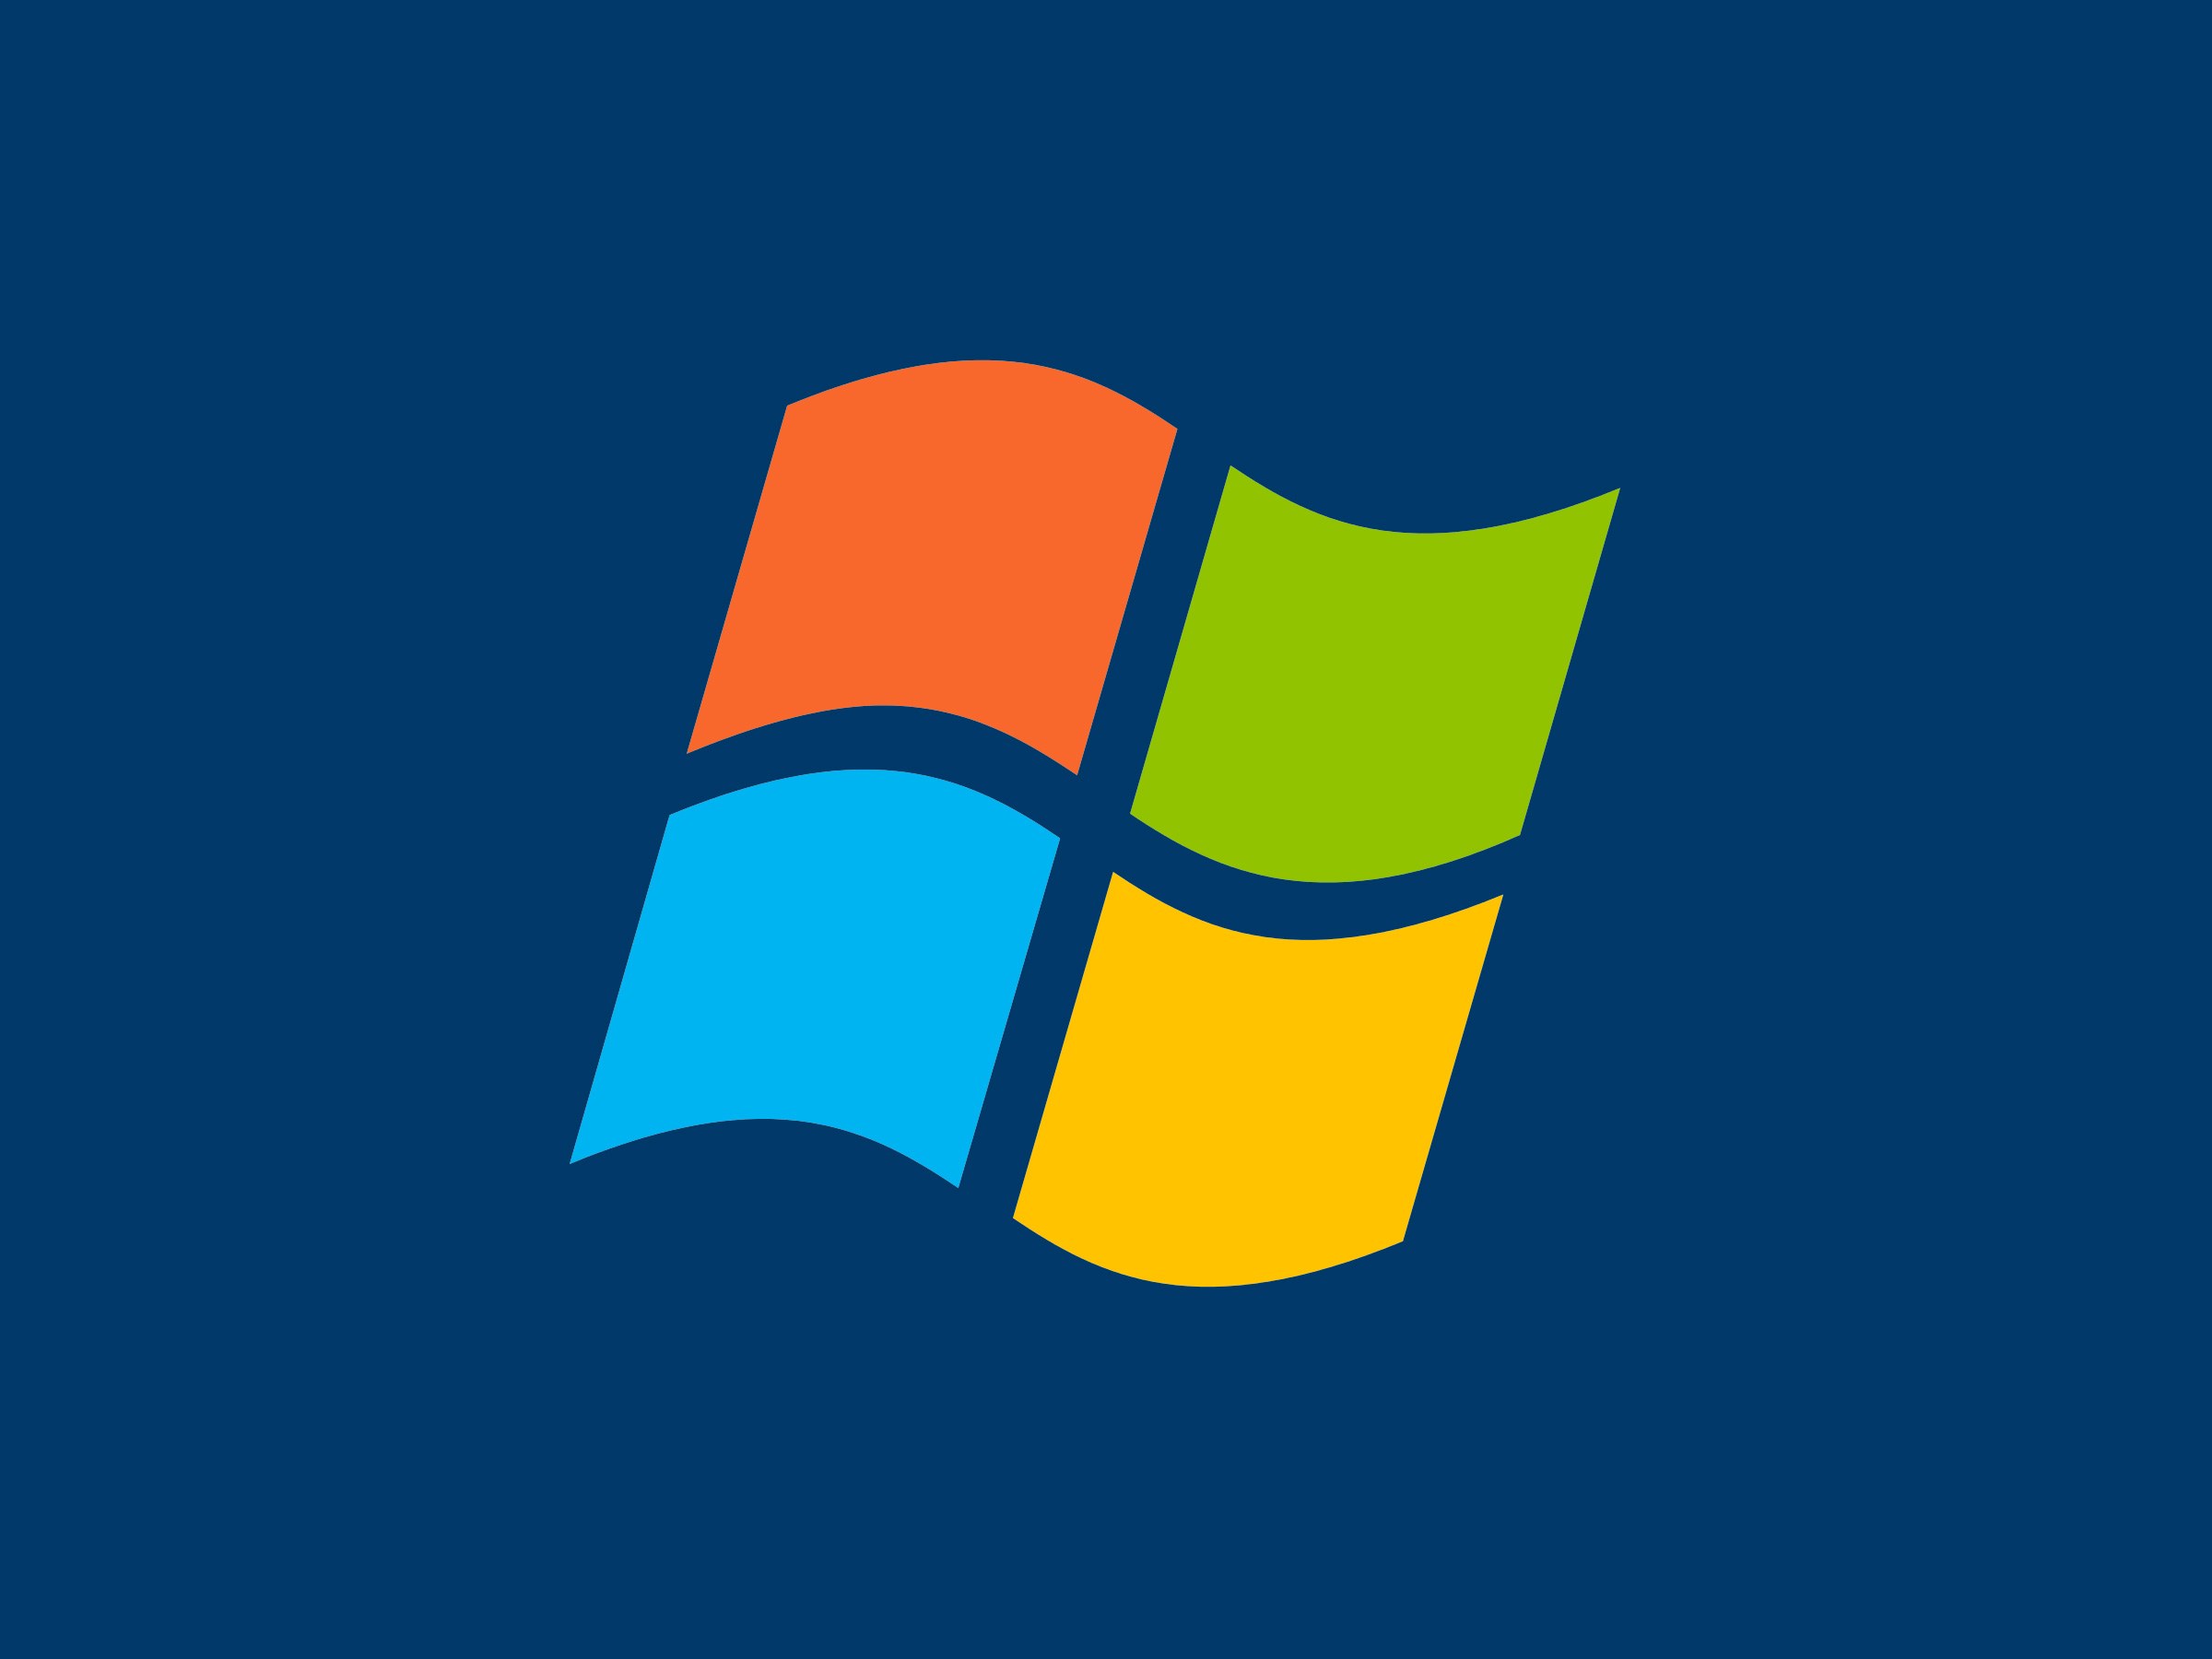 Windows Vista Support Has Ended, So Update ASAP | WIRED